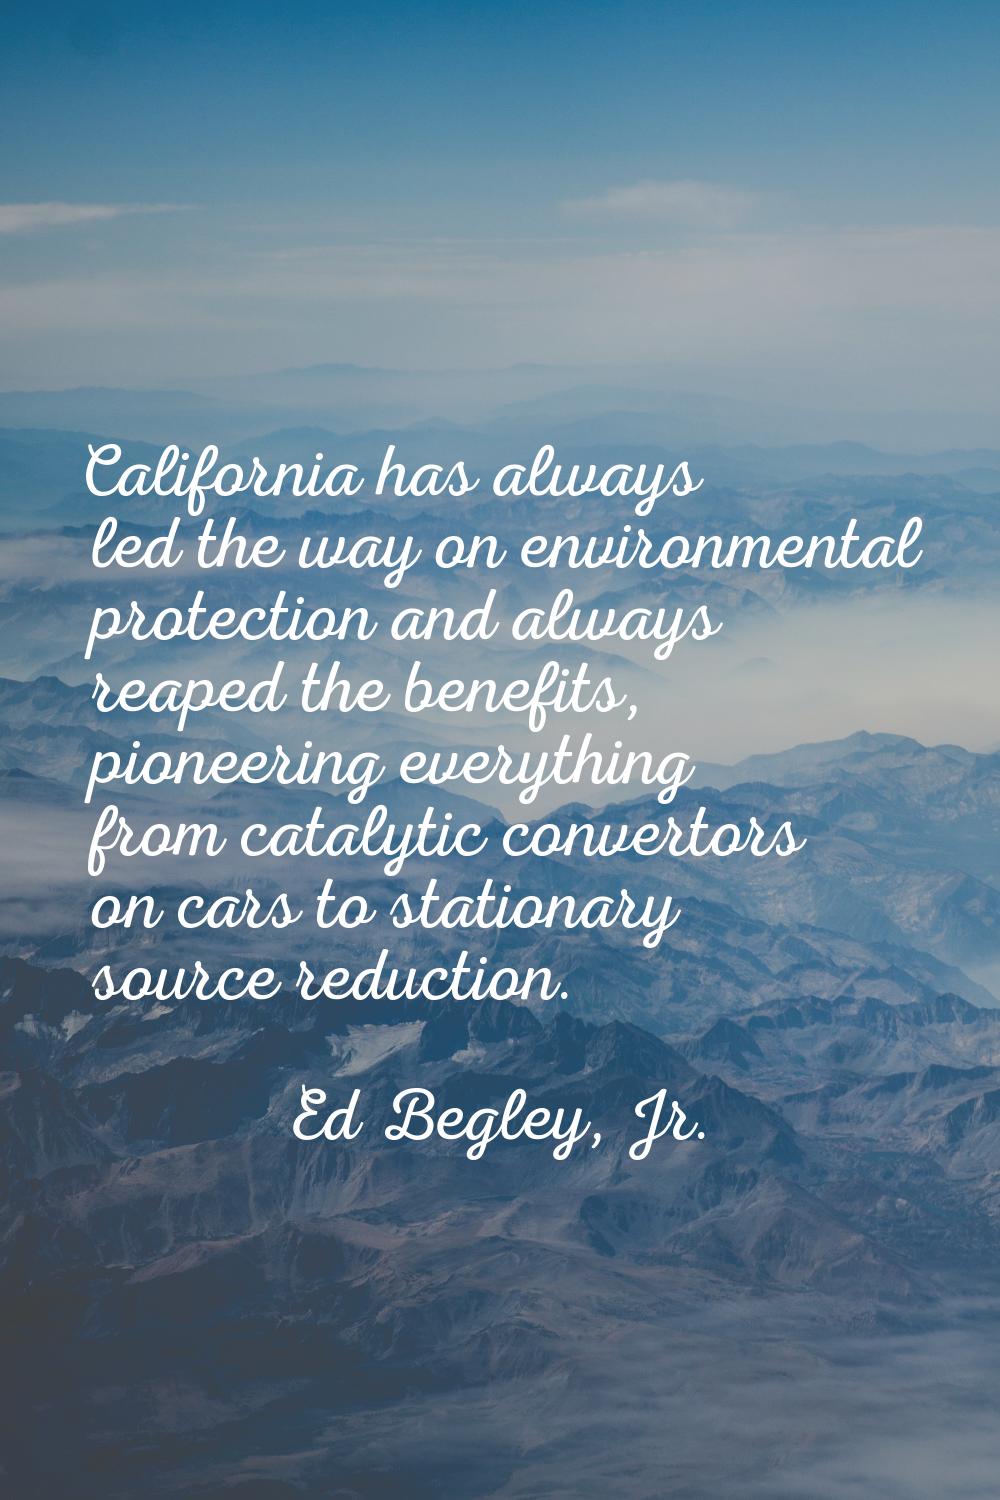 California has always led the way on environmental protection and always reaped the benefits, pione